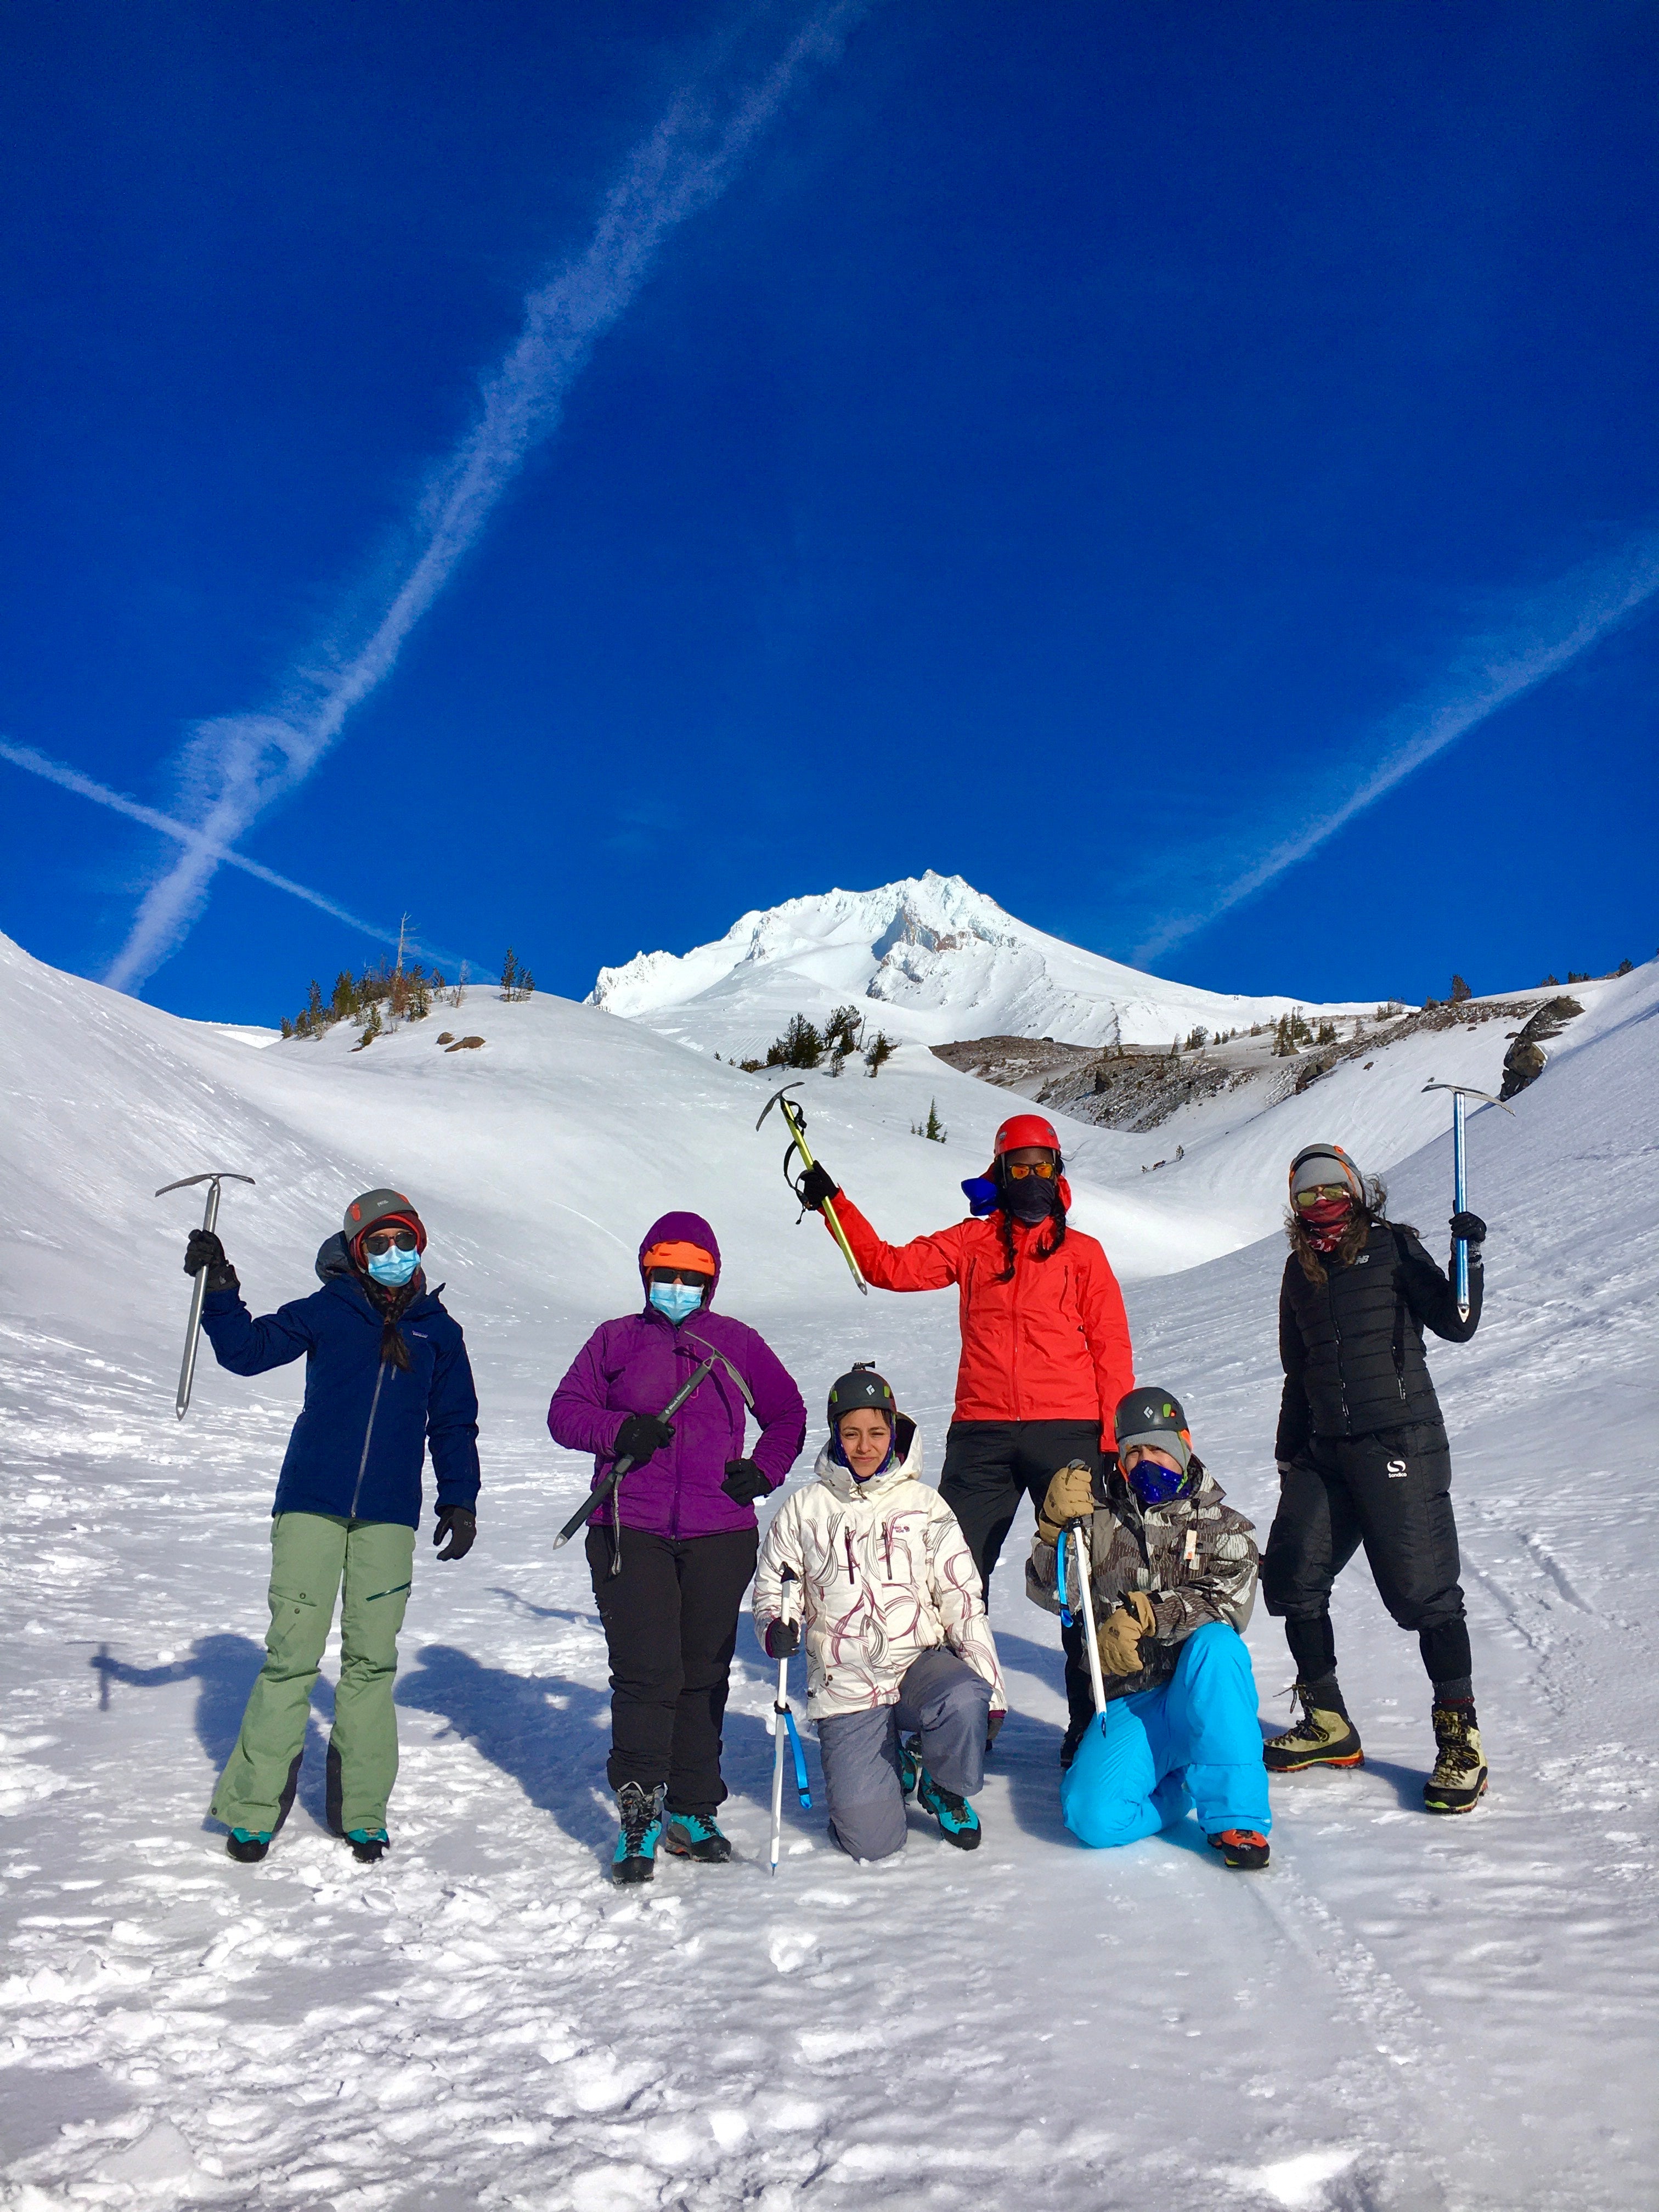 Theresa and a group of women of color on a mountaineering endeavor.